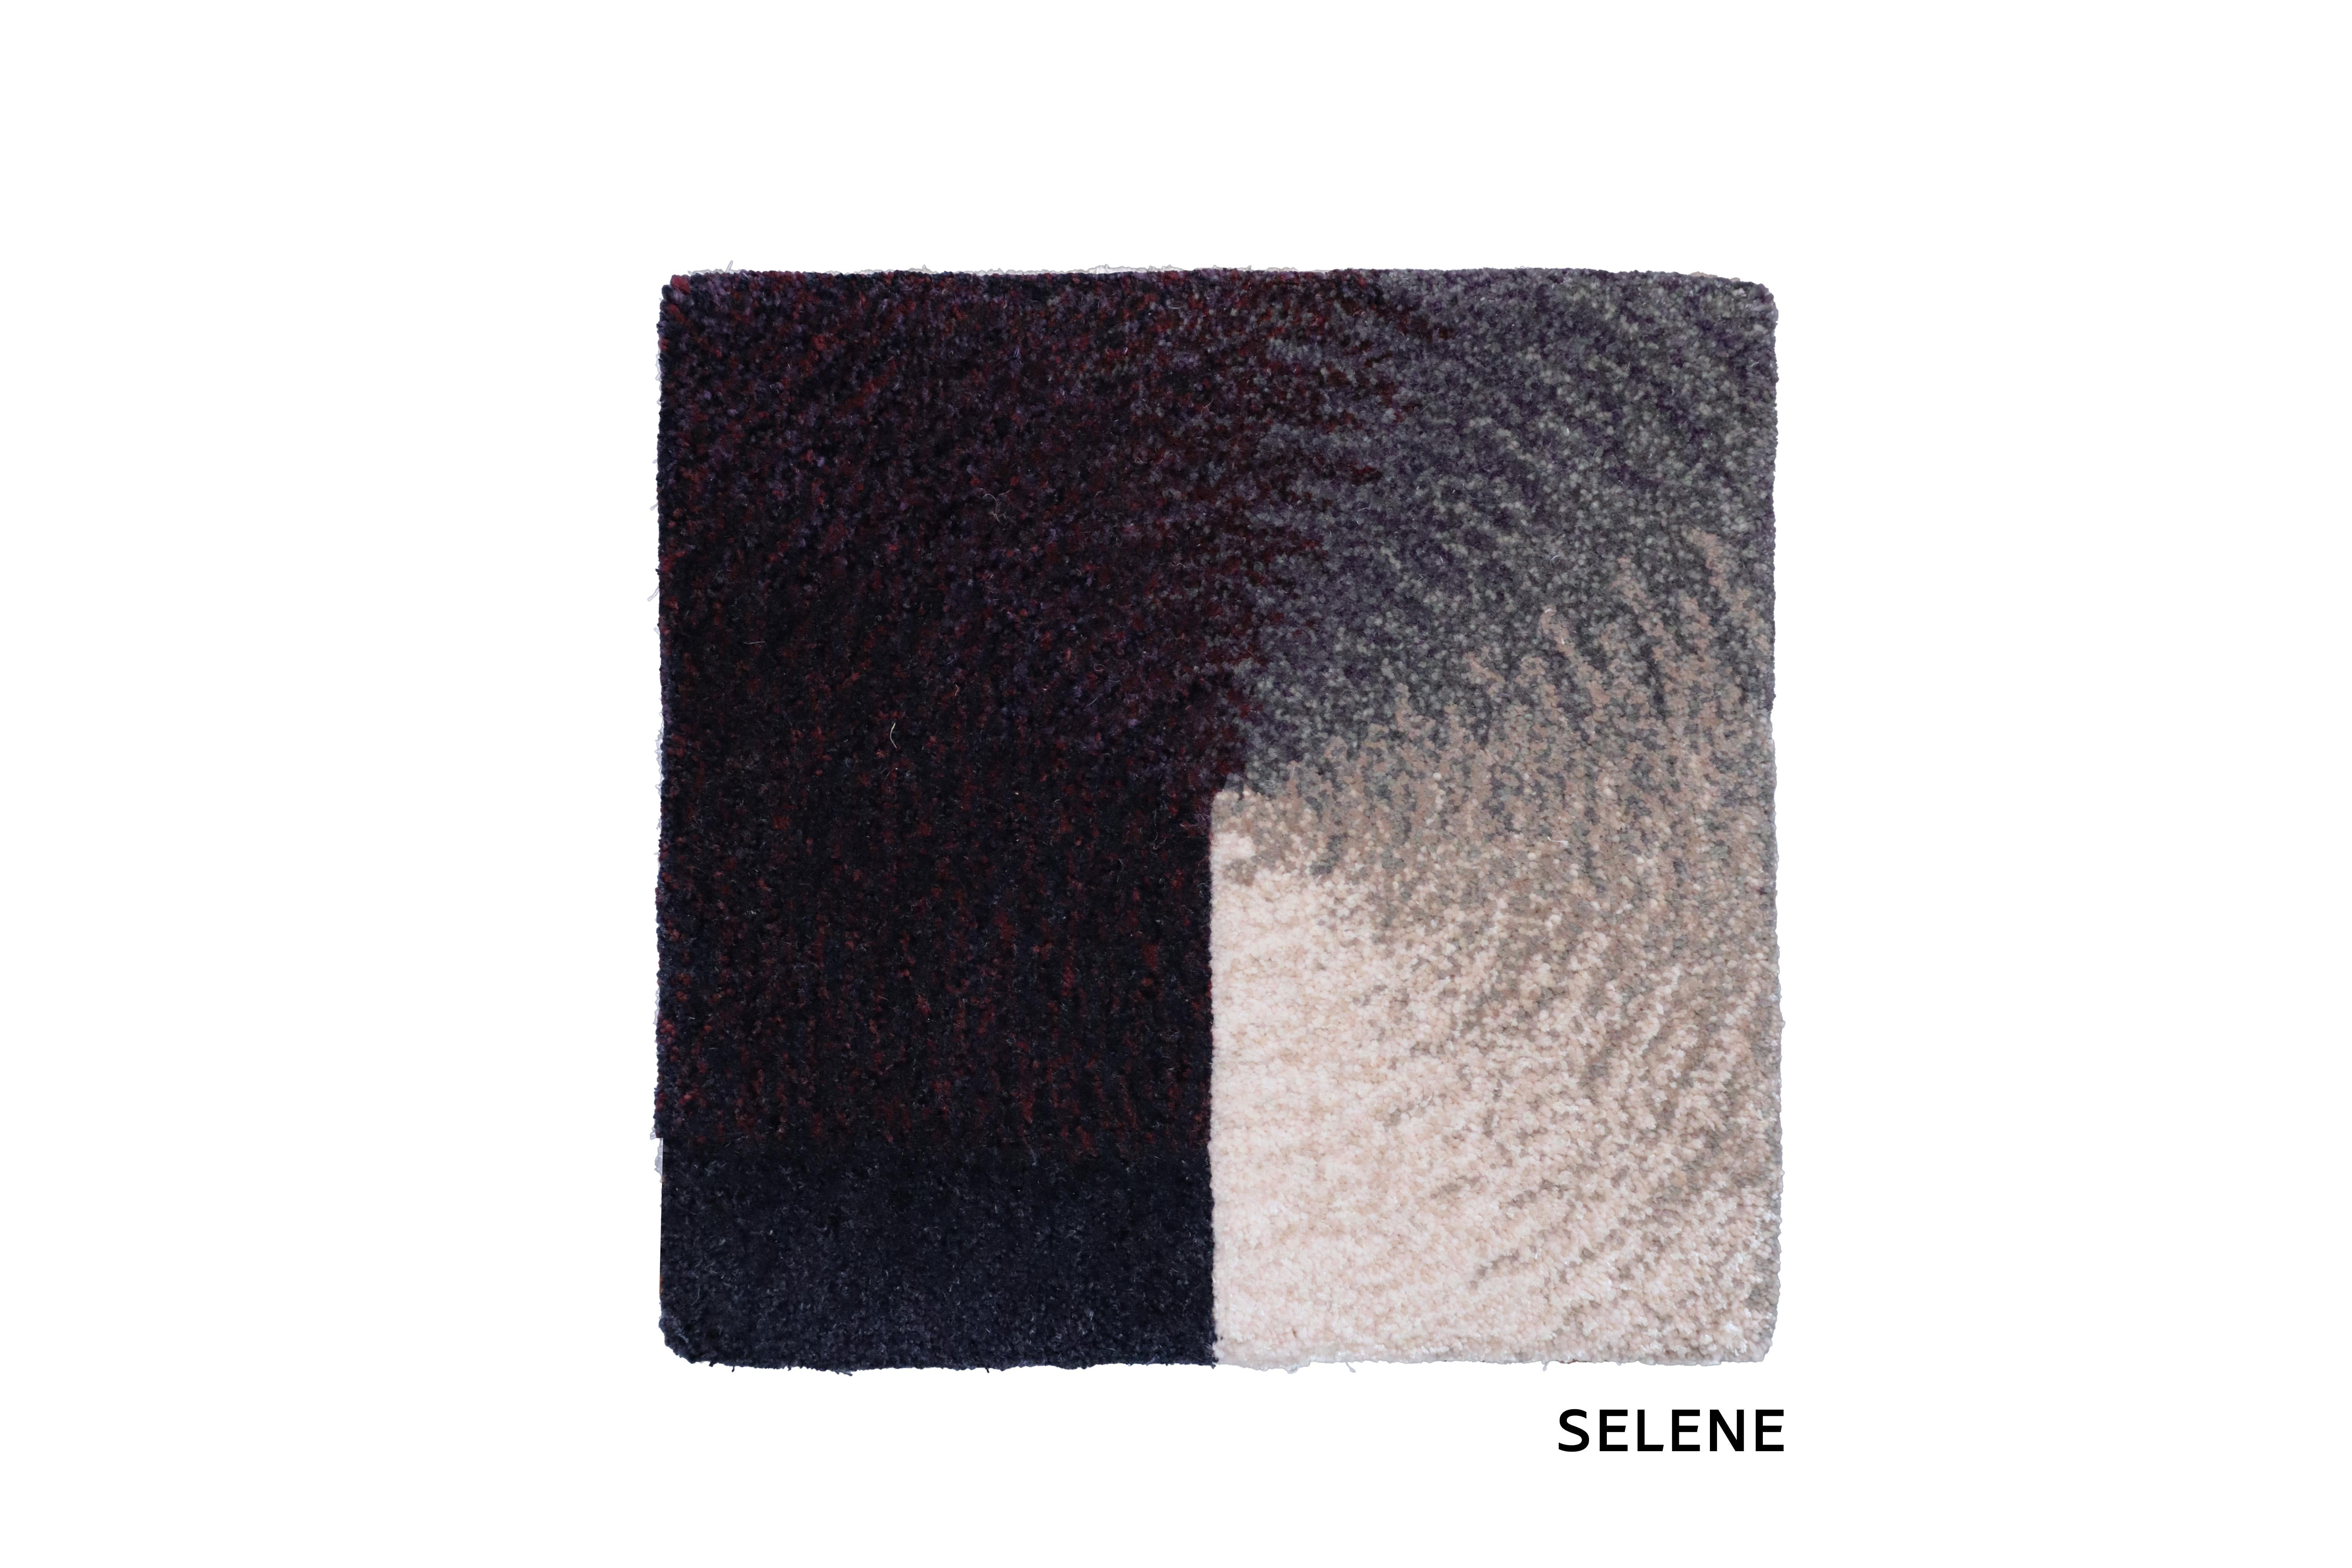 EOS & SELENE collection rug sample. 
Price is for 1 sample sized 30x30cm (12x12 inches). 
Please specify the name of the design that you would like to purchase a sample for, EOS or SELENE.

The rug collection EOS & SELENE is a playful statement on